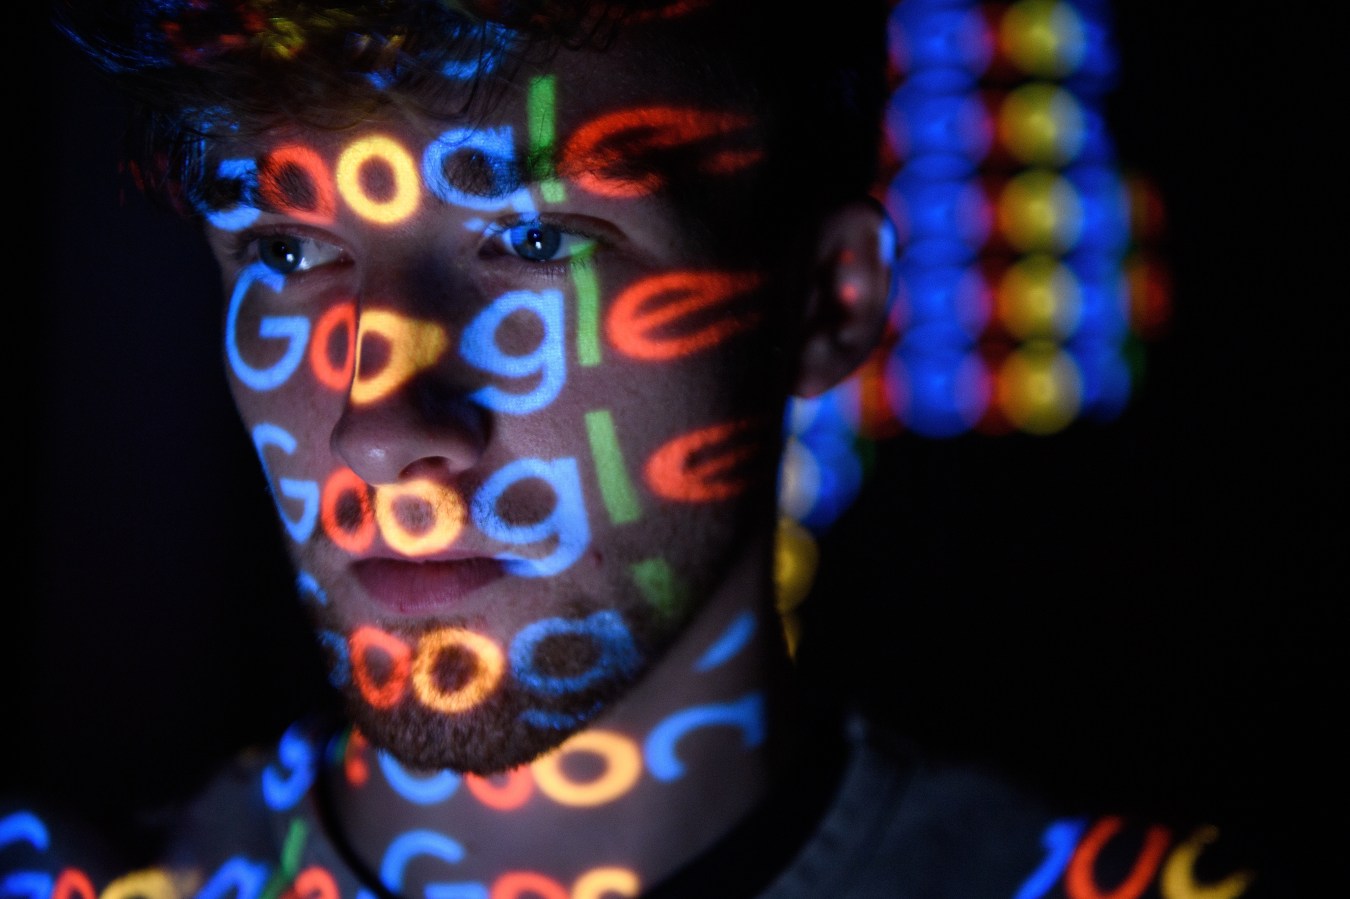 The Google logo is projected onto a person's face